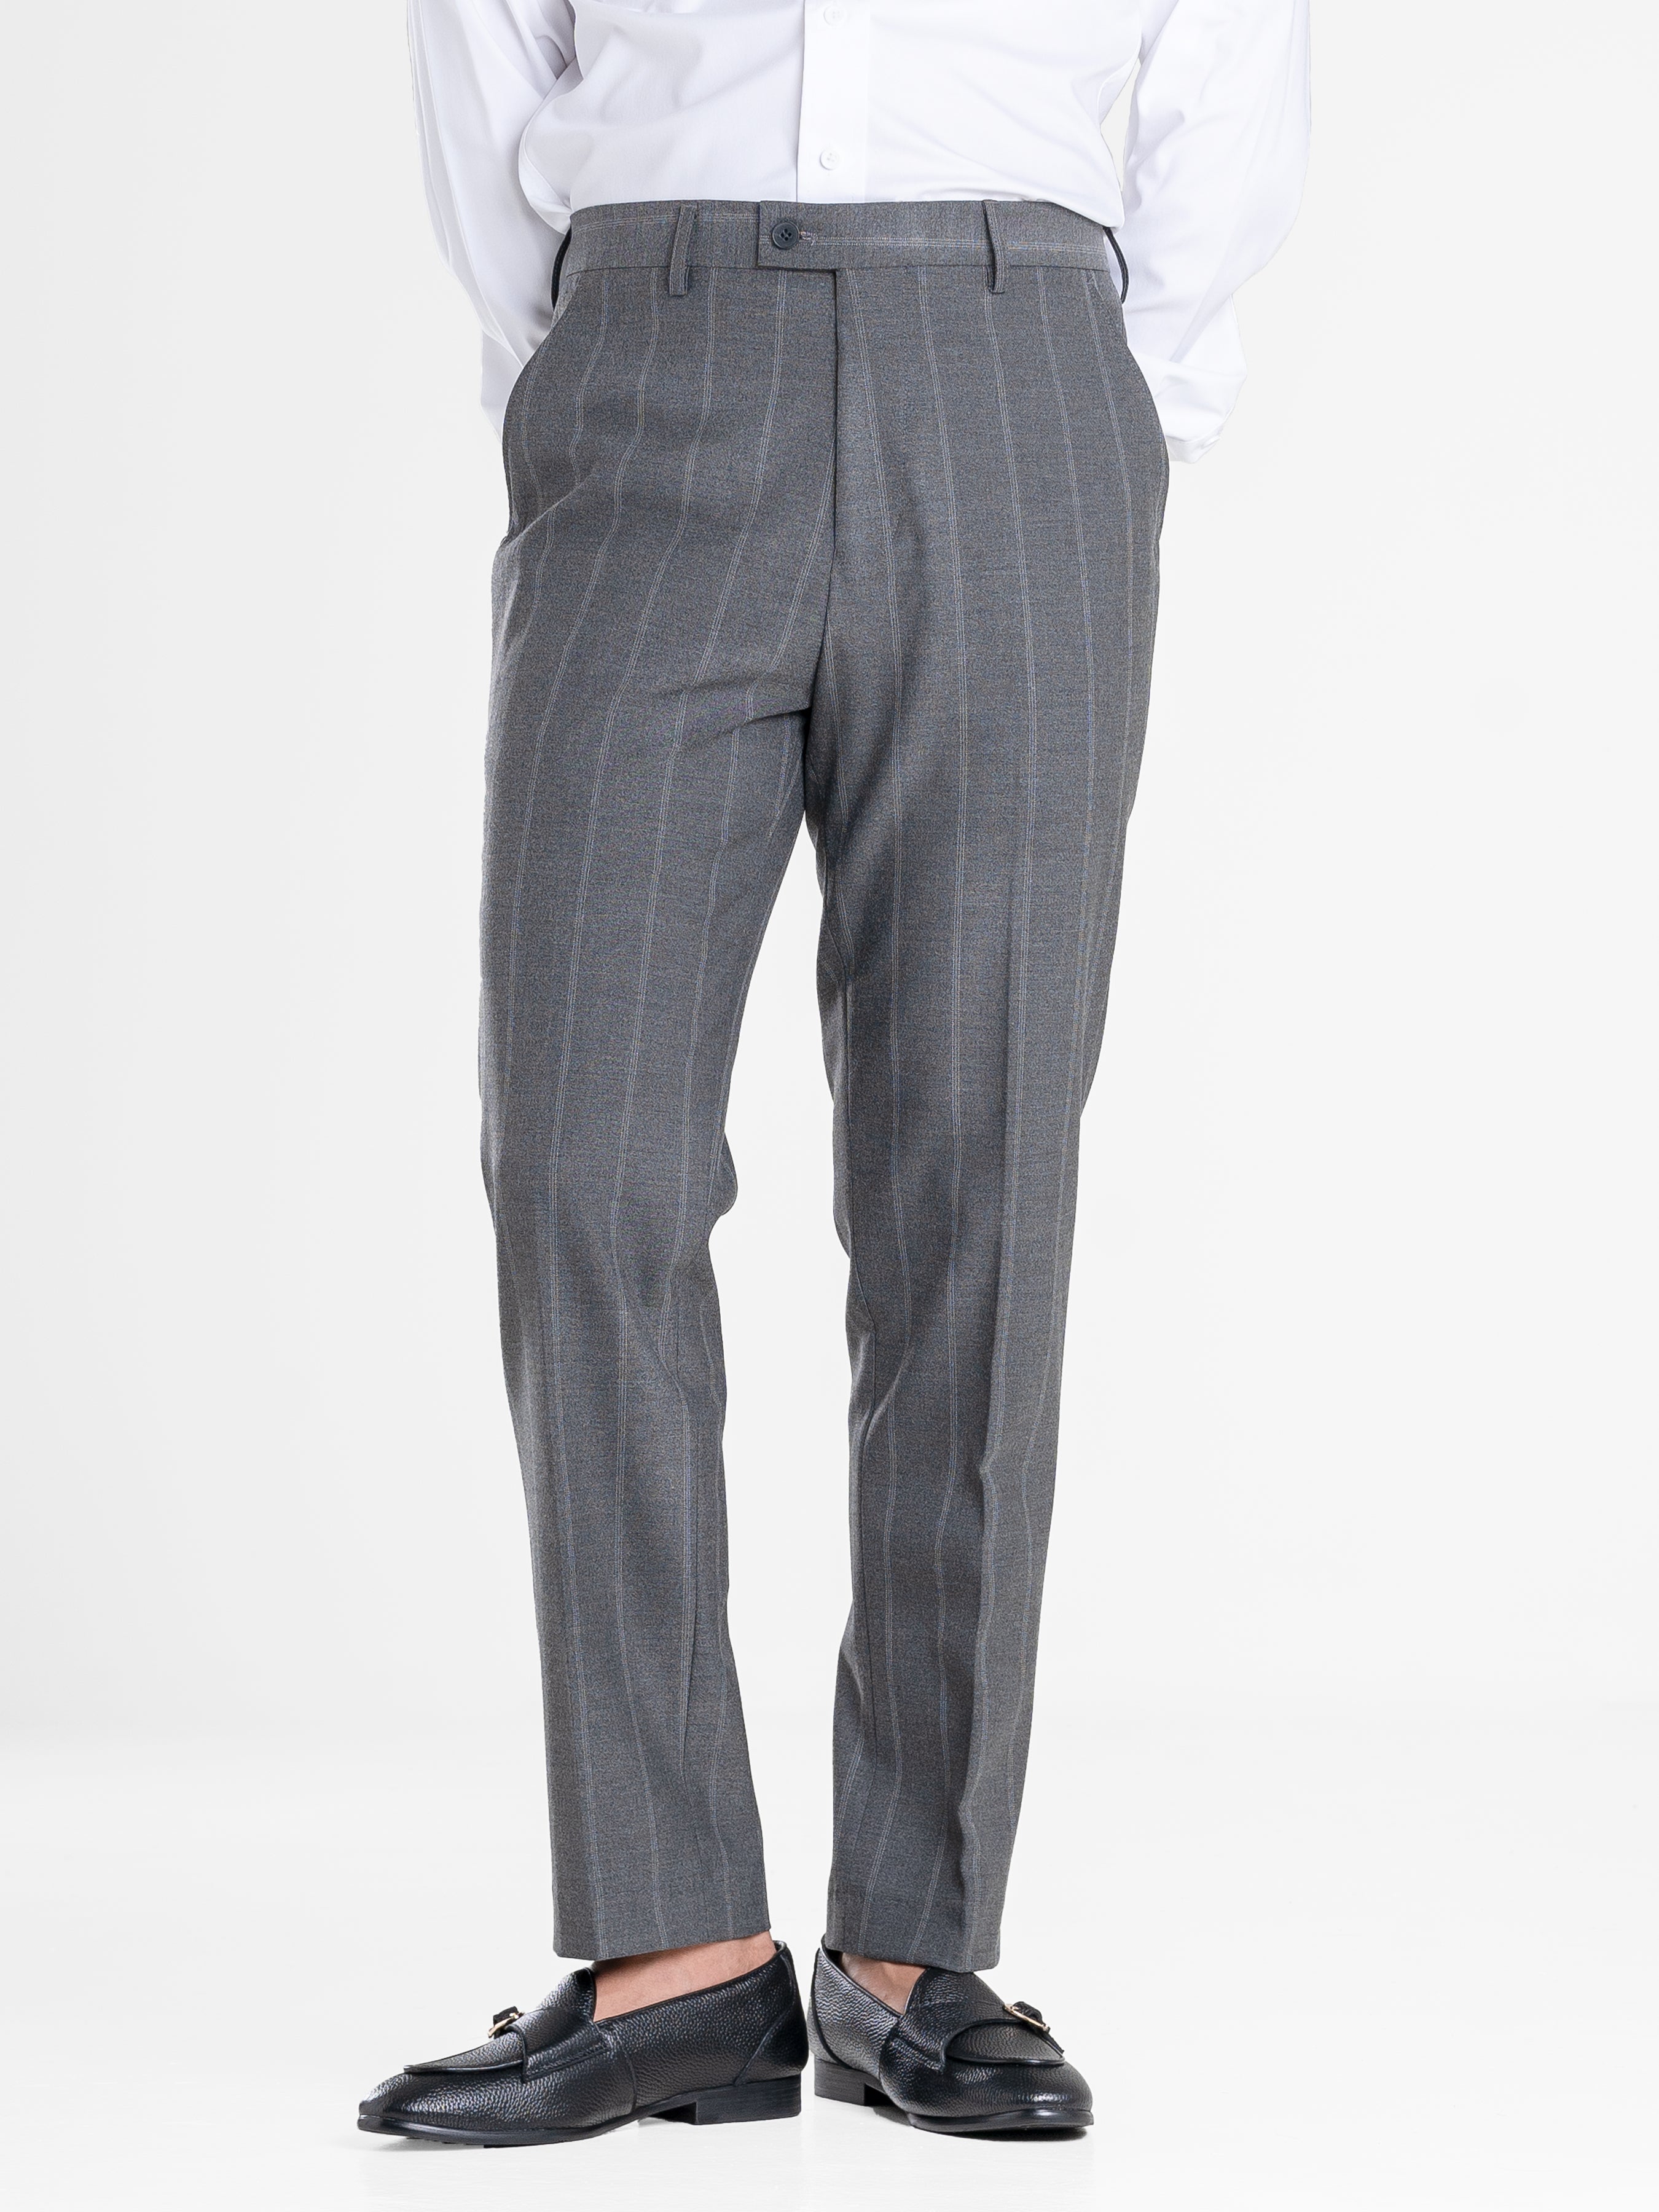 Trousers With Belt Loop -  Dark Grey Wide Stripes (Stretchable)